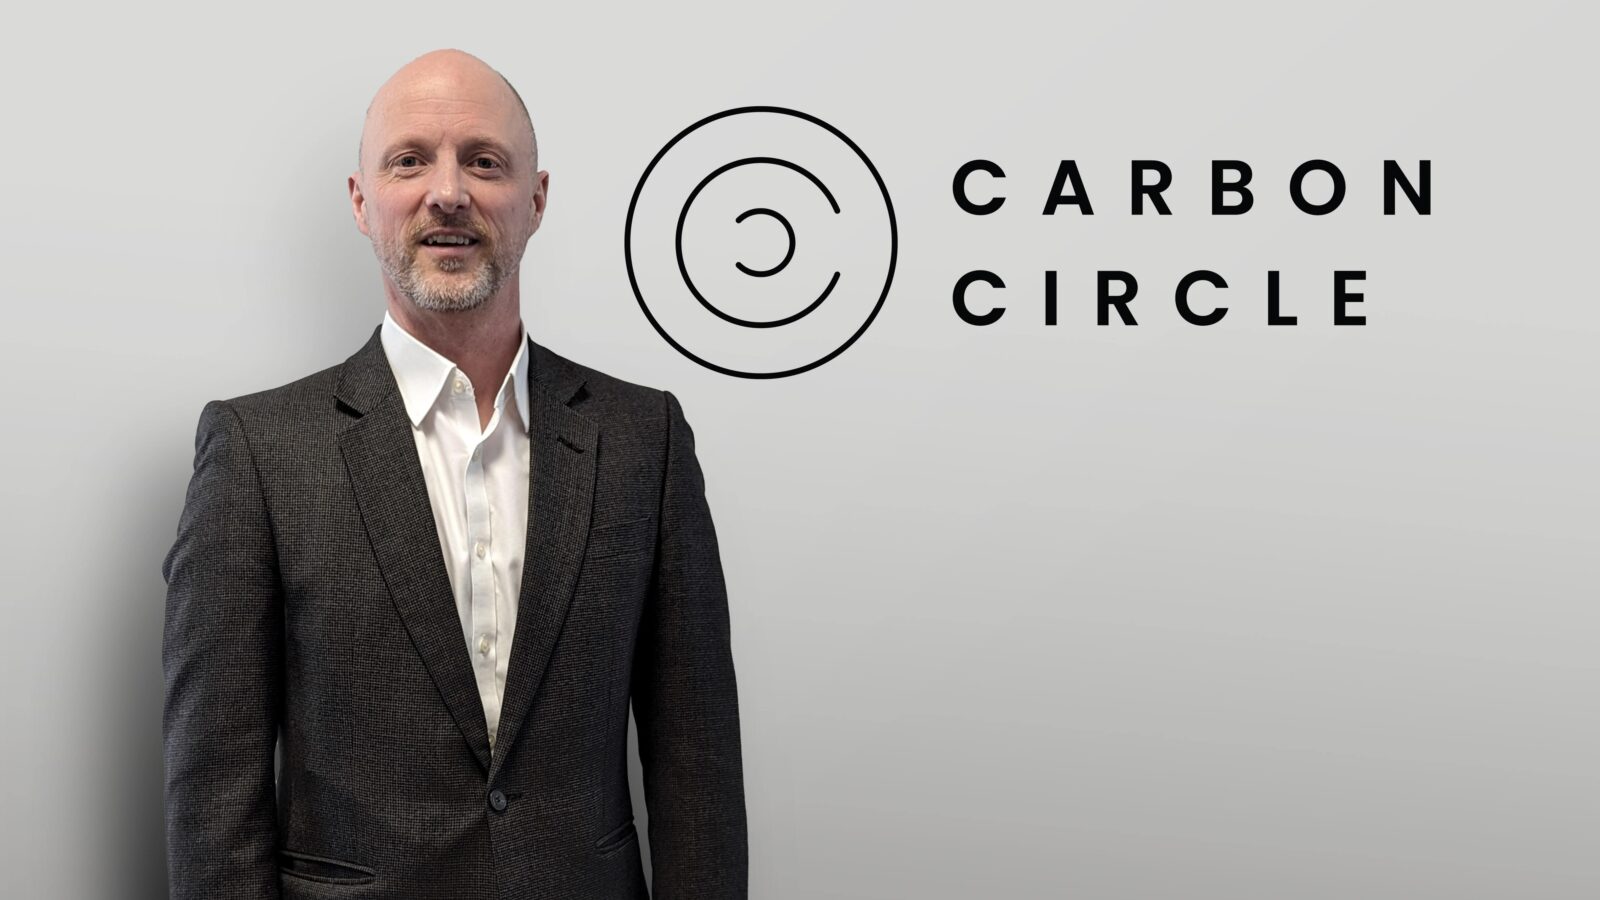 Carbon Circle UK appoints new General Manager as company looks to increase influence on energy transition